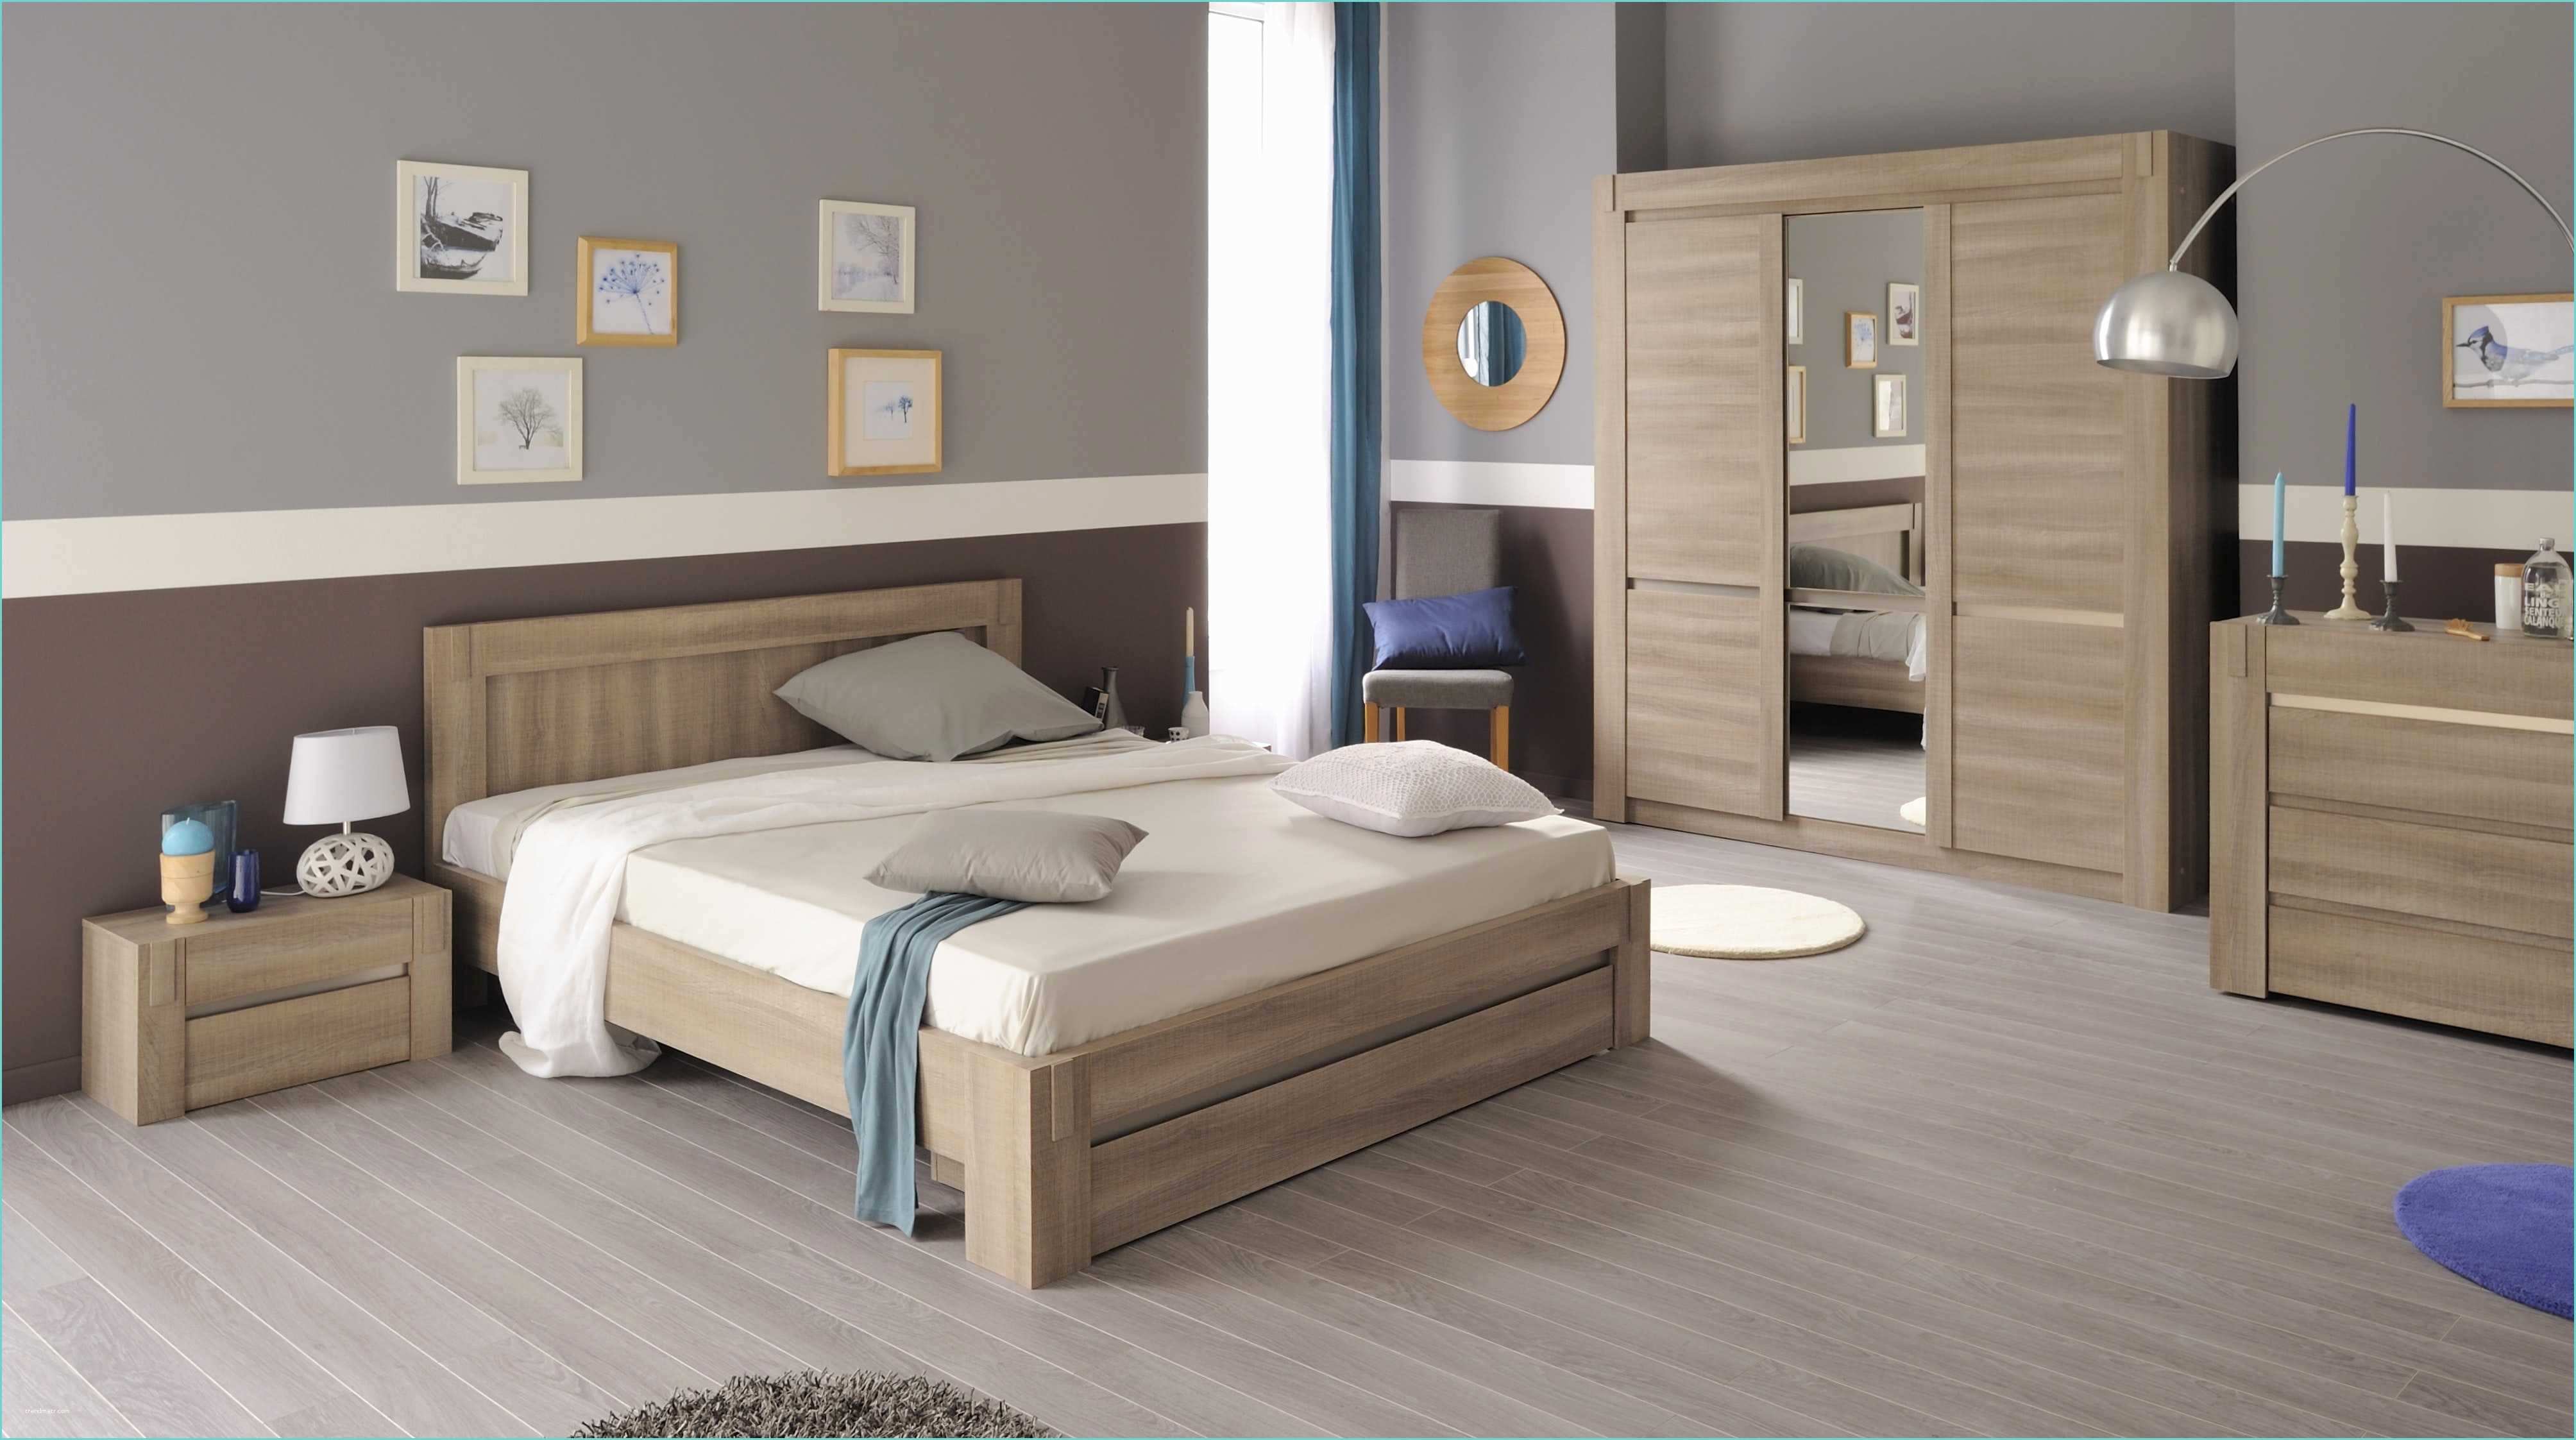 Chambre A Coucher Italienne Pas Cher Stunning Chambre Italienne Pas Cher S Design Trends